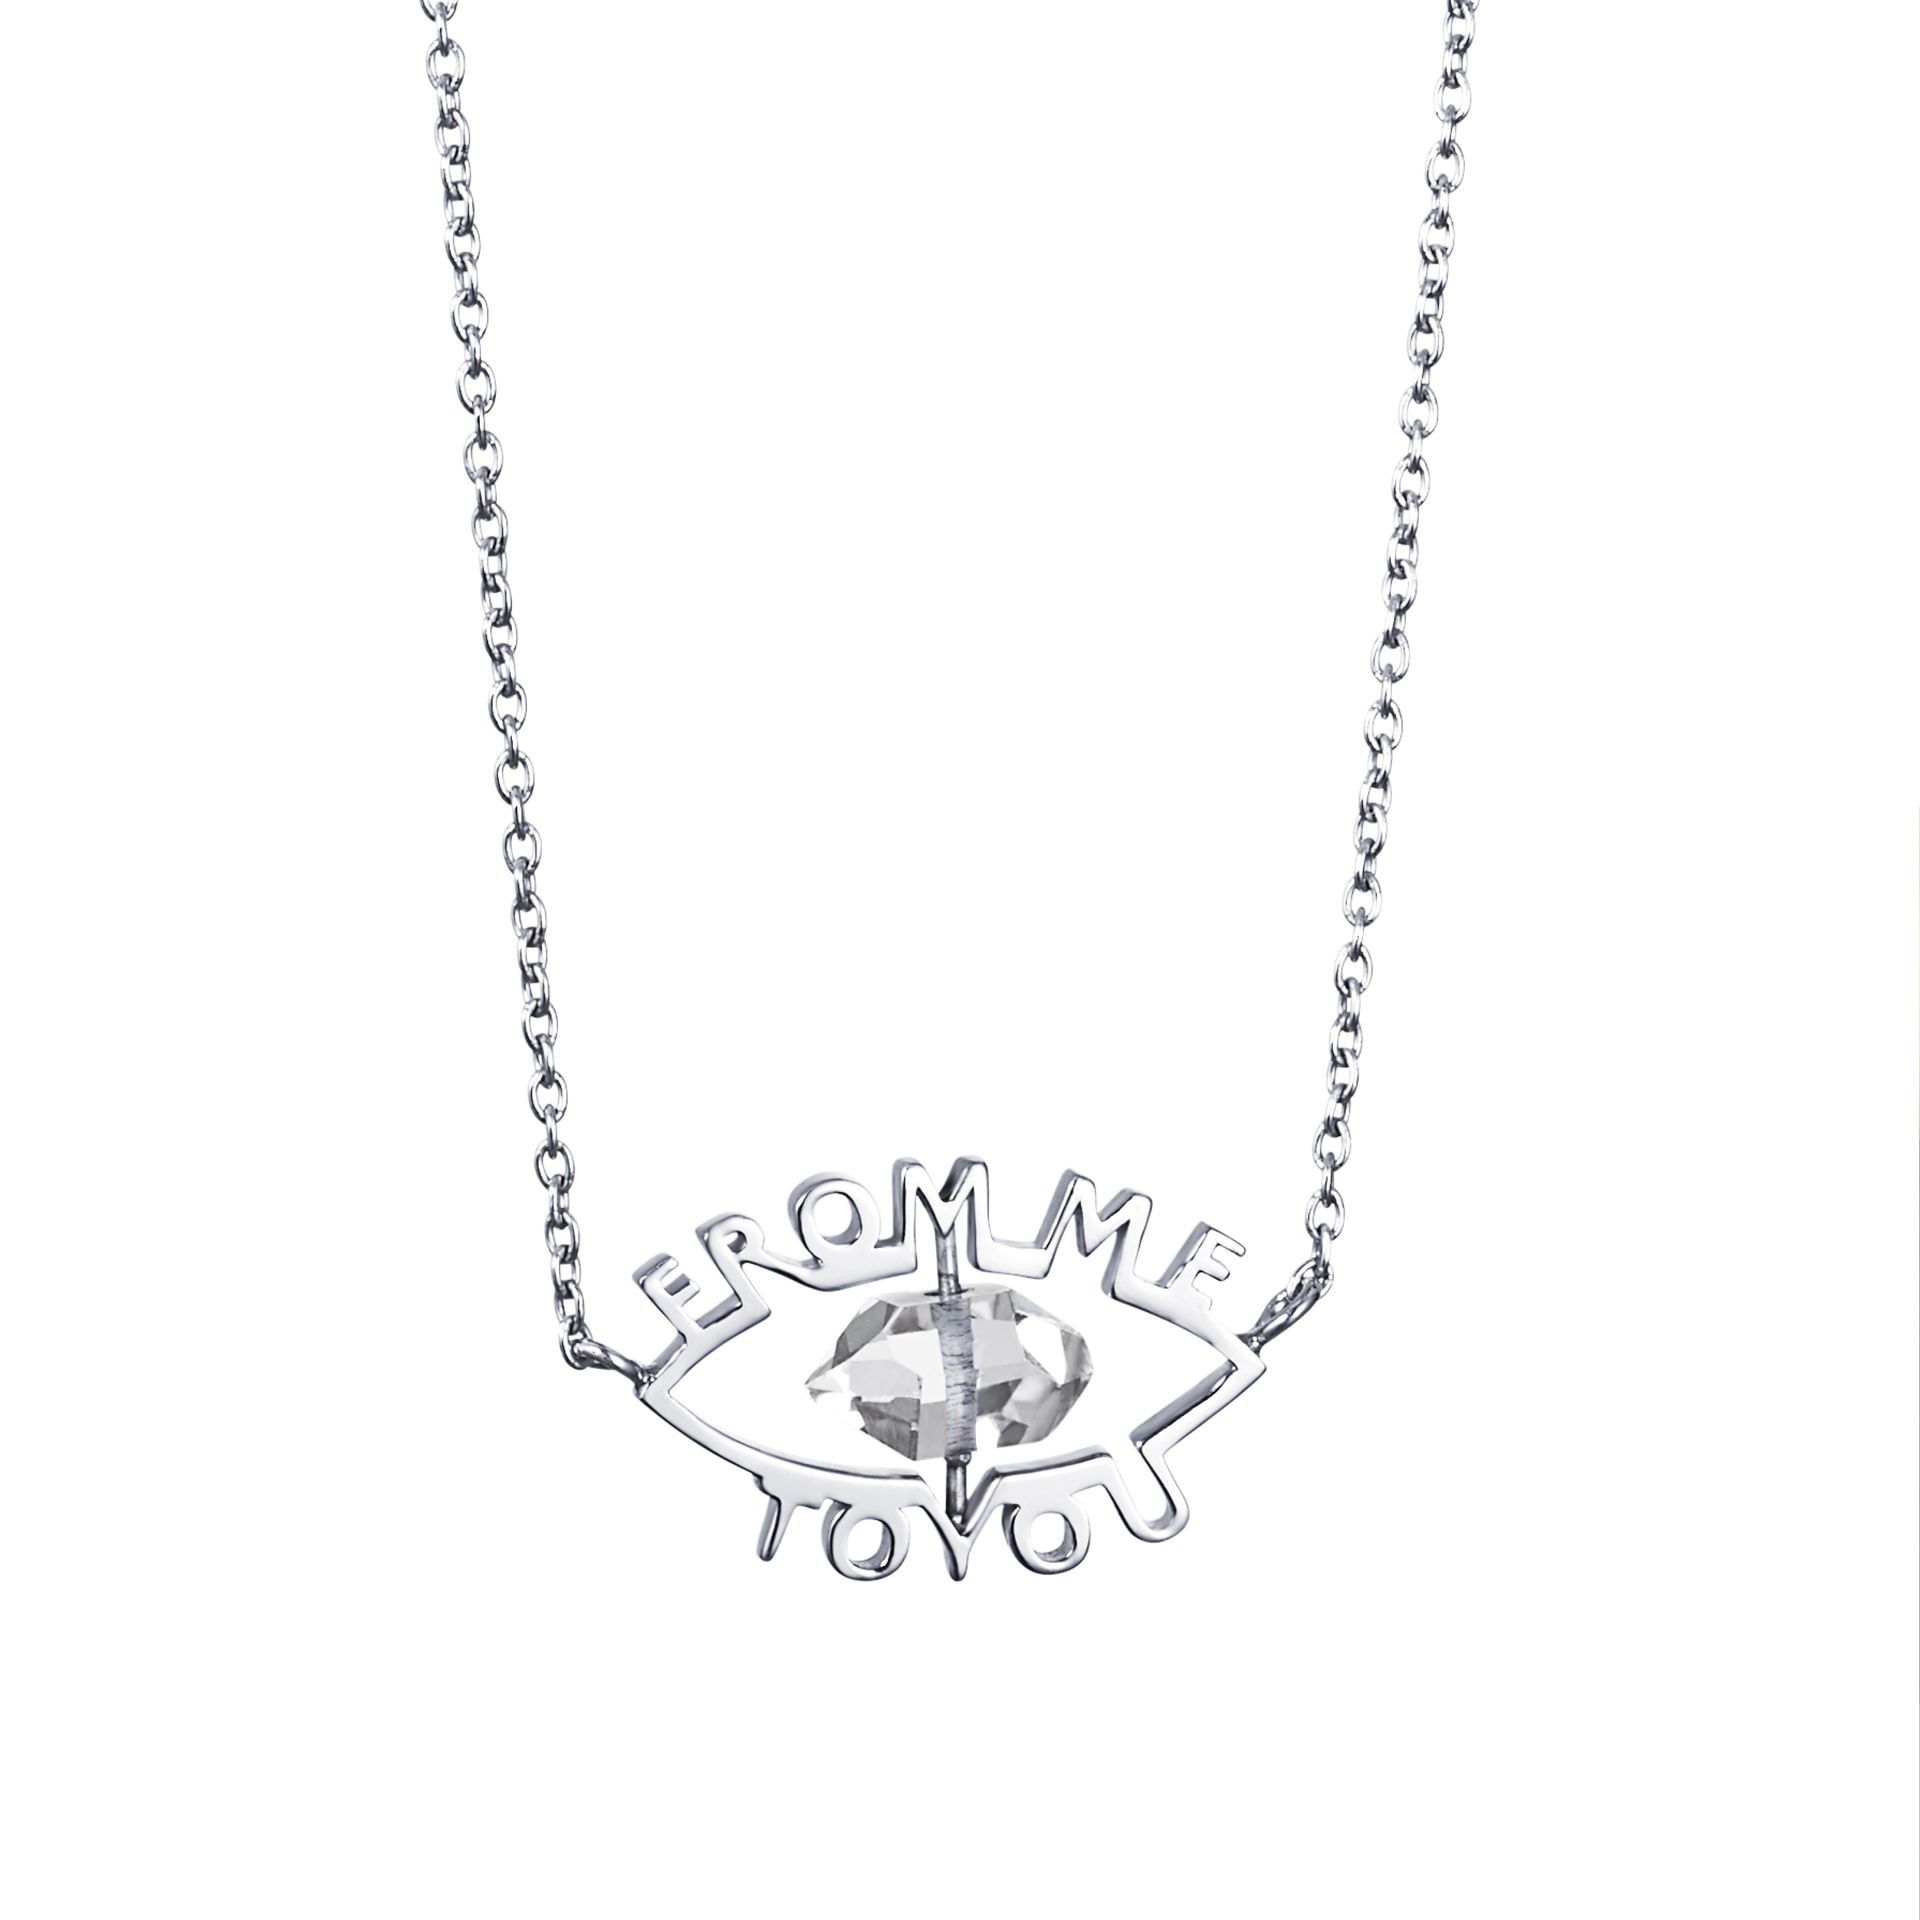 Efva Attling From Me To You Necklace. 42/45 CM - SILVER